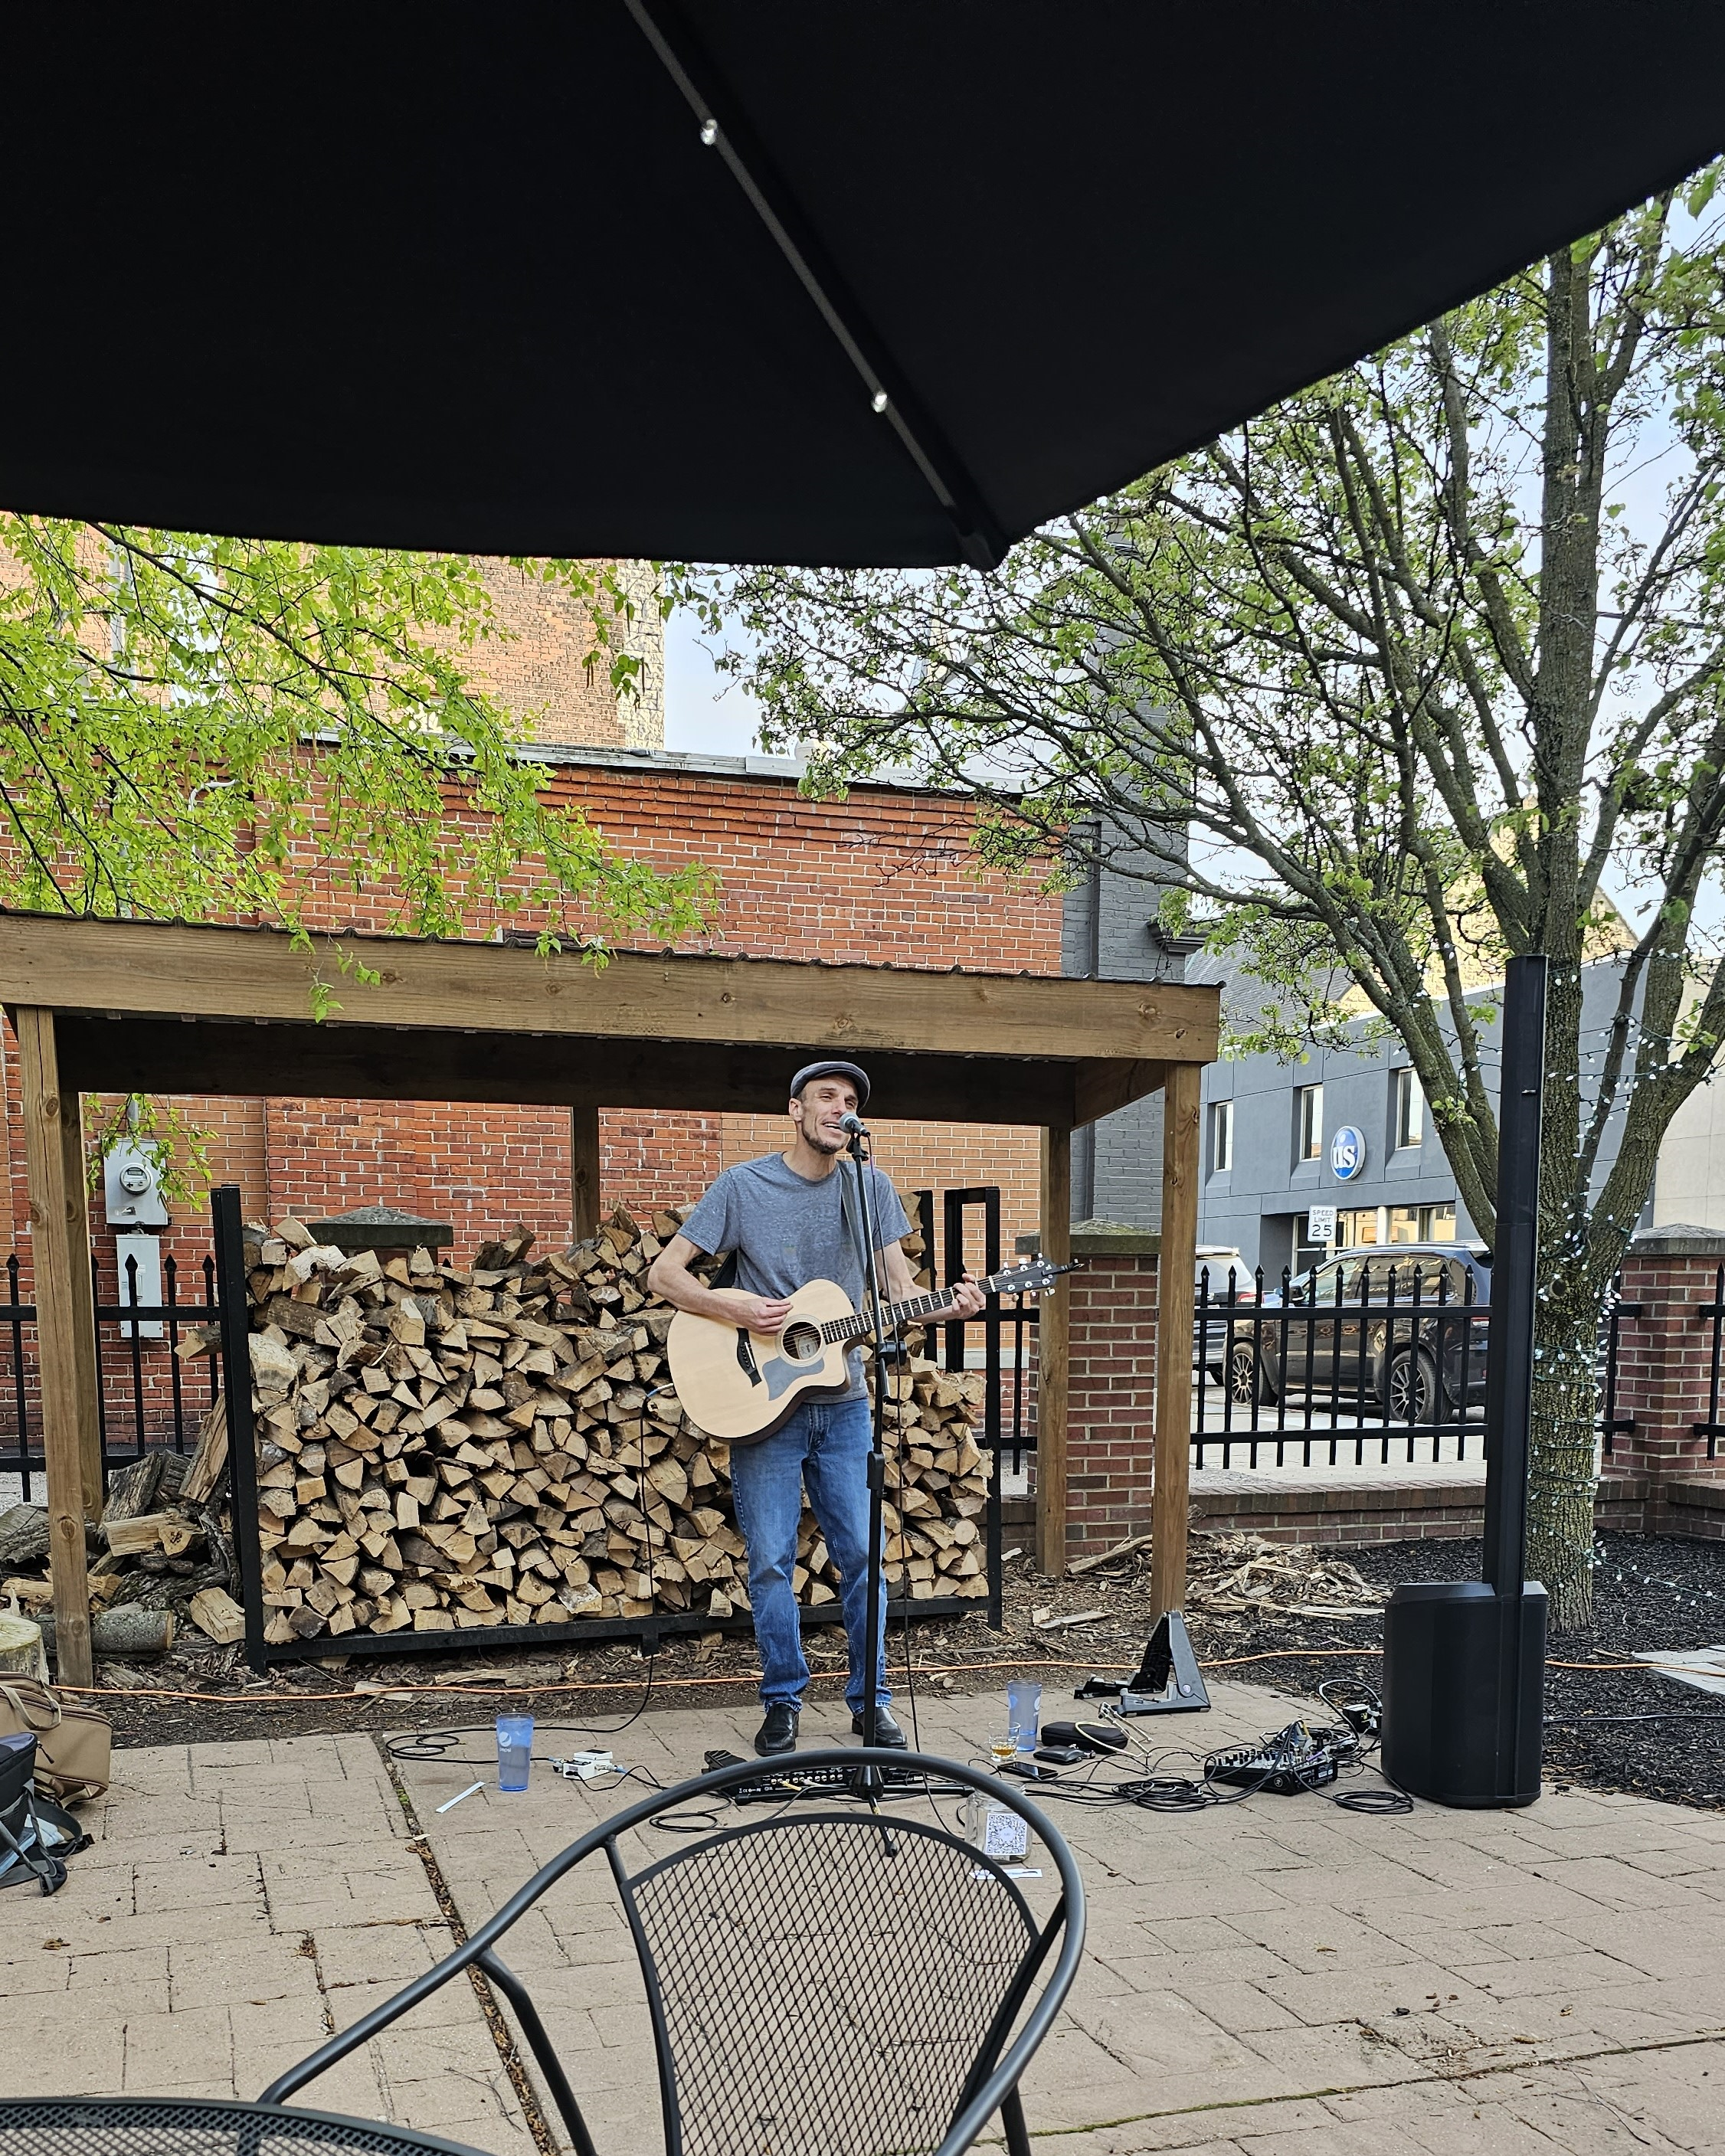 Michael standing with his guitar in front of stacked wood on the Amato's patio